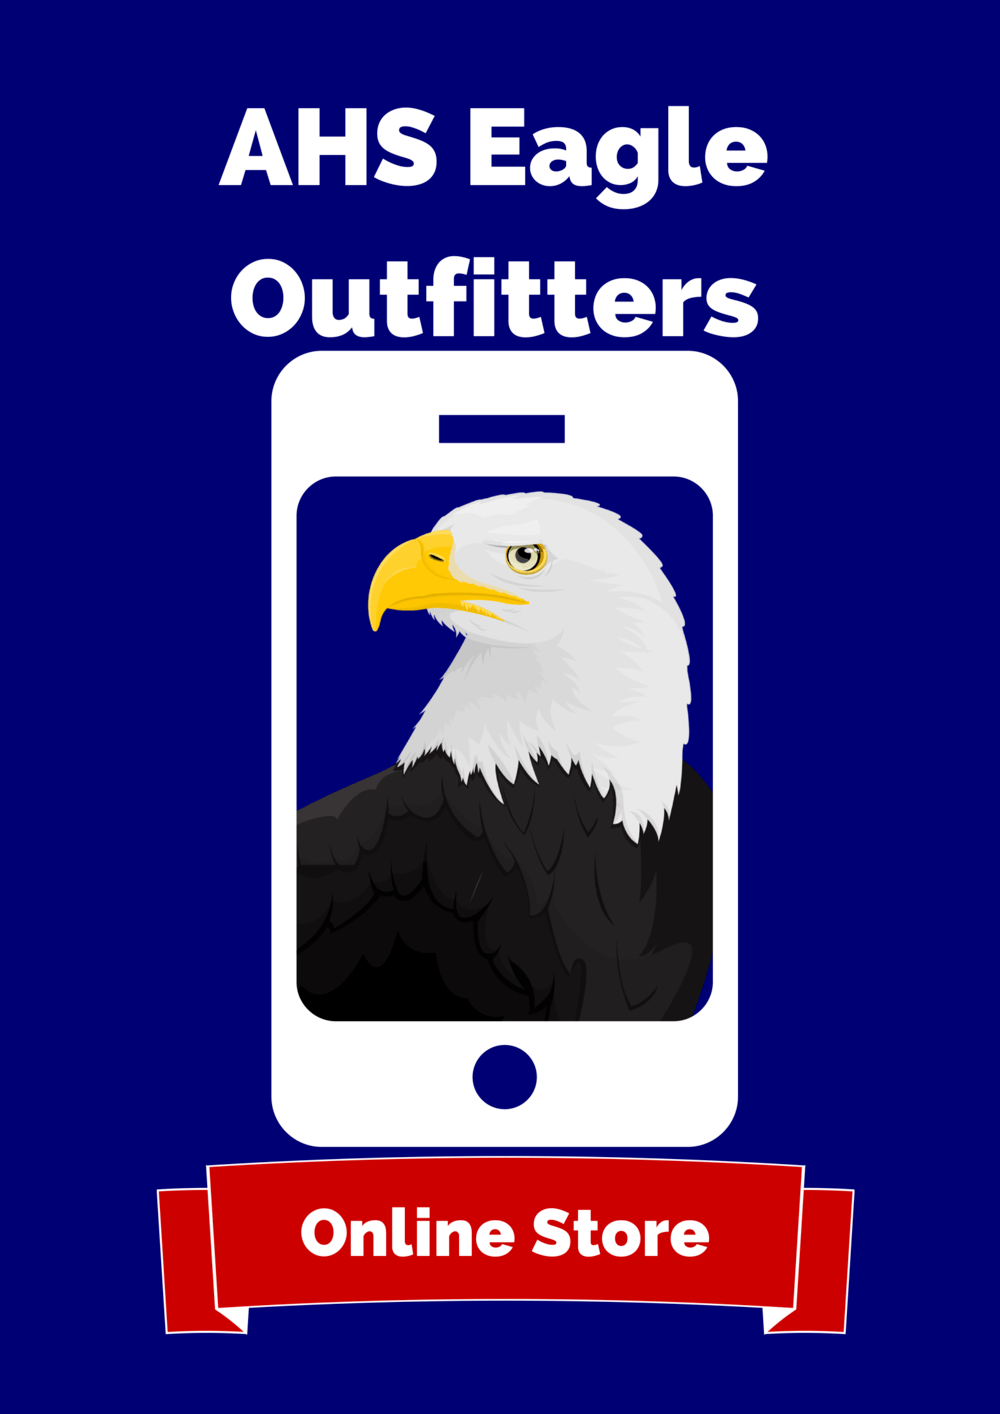 AHS Eagle Outfitters